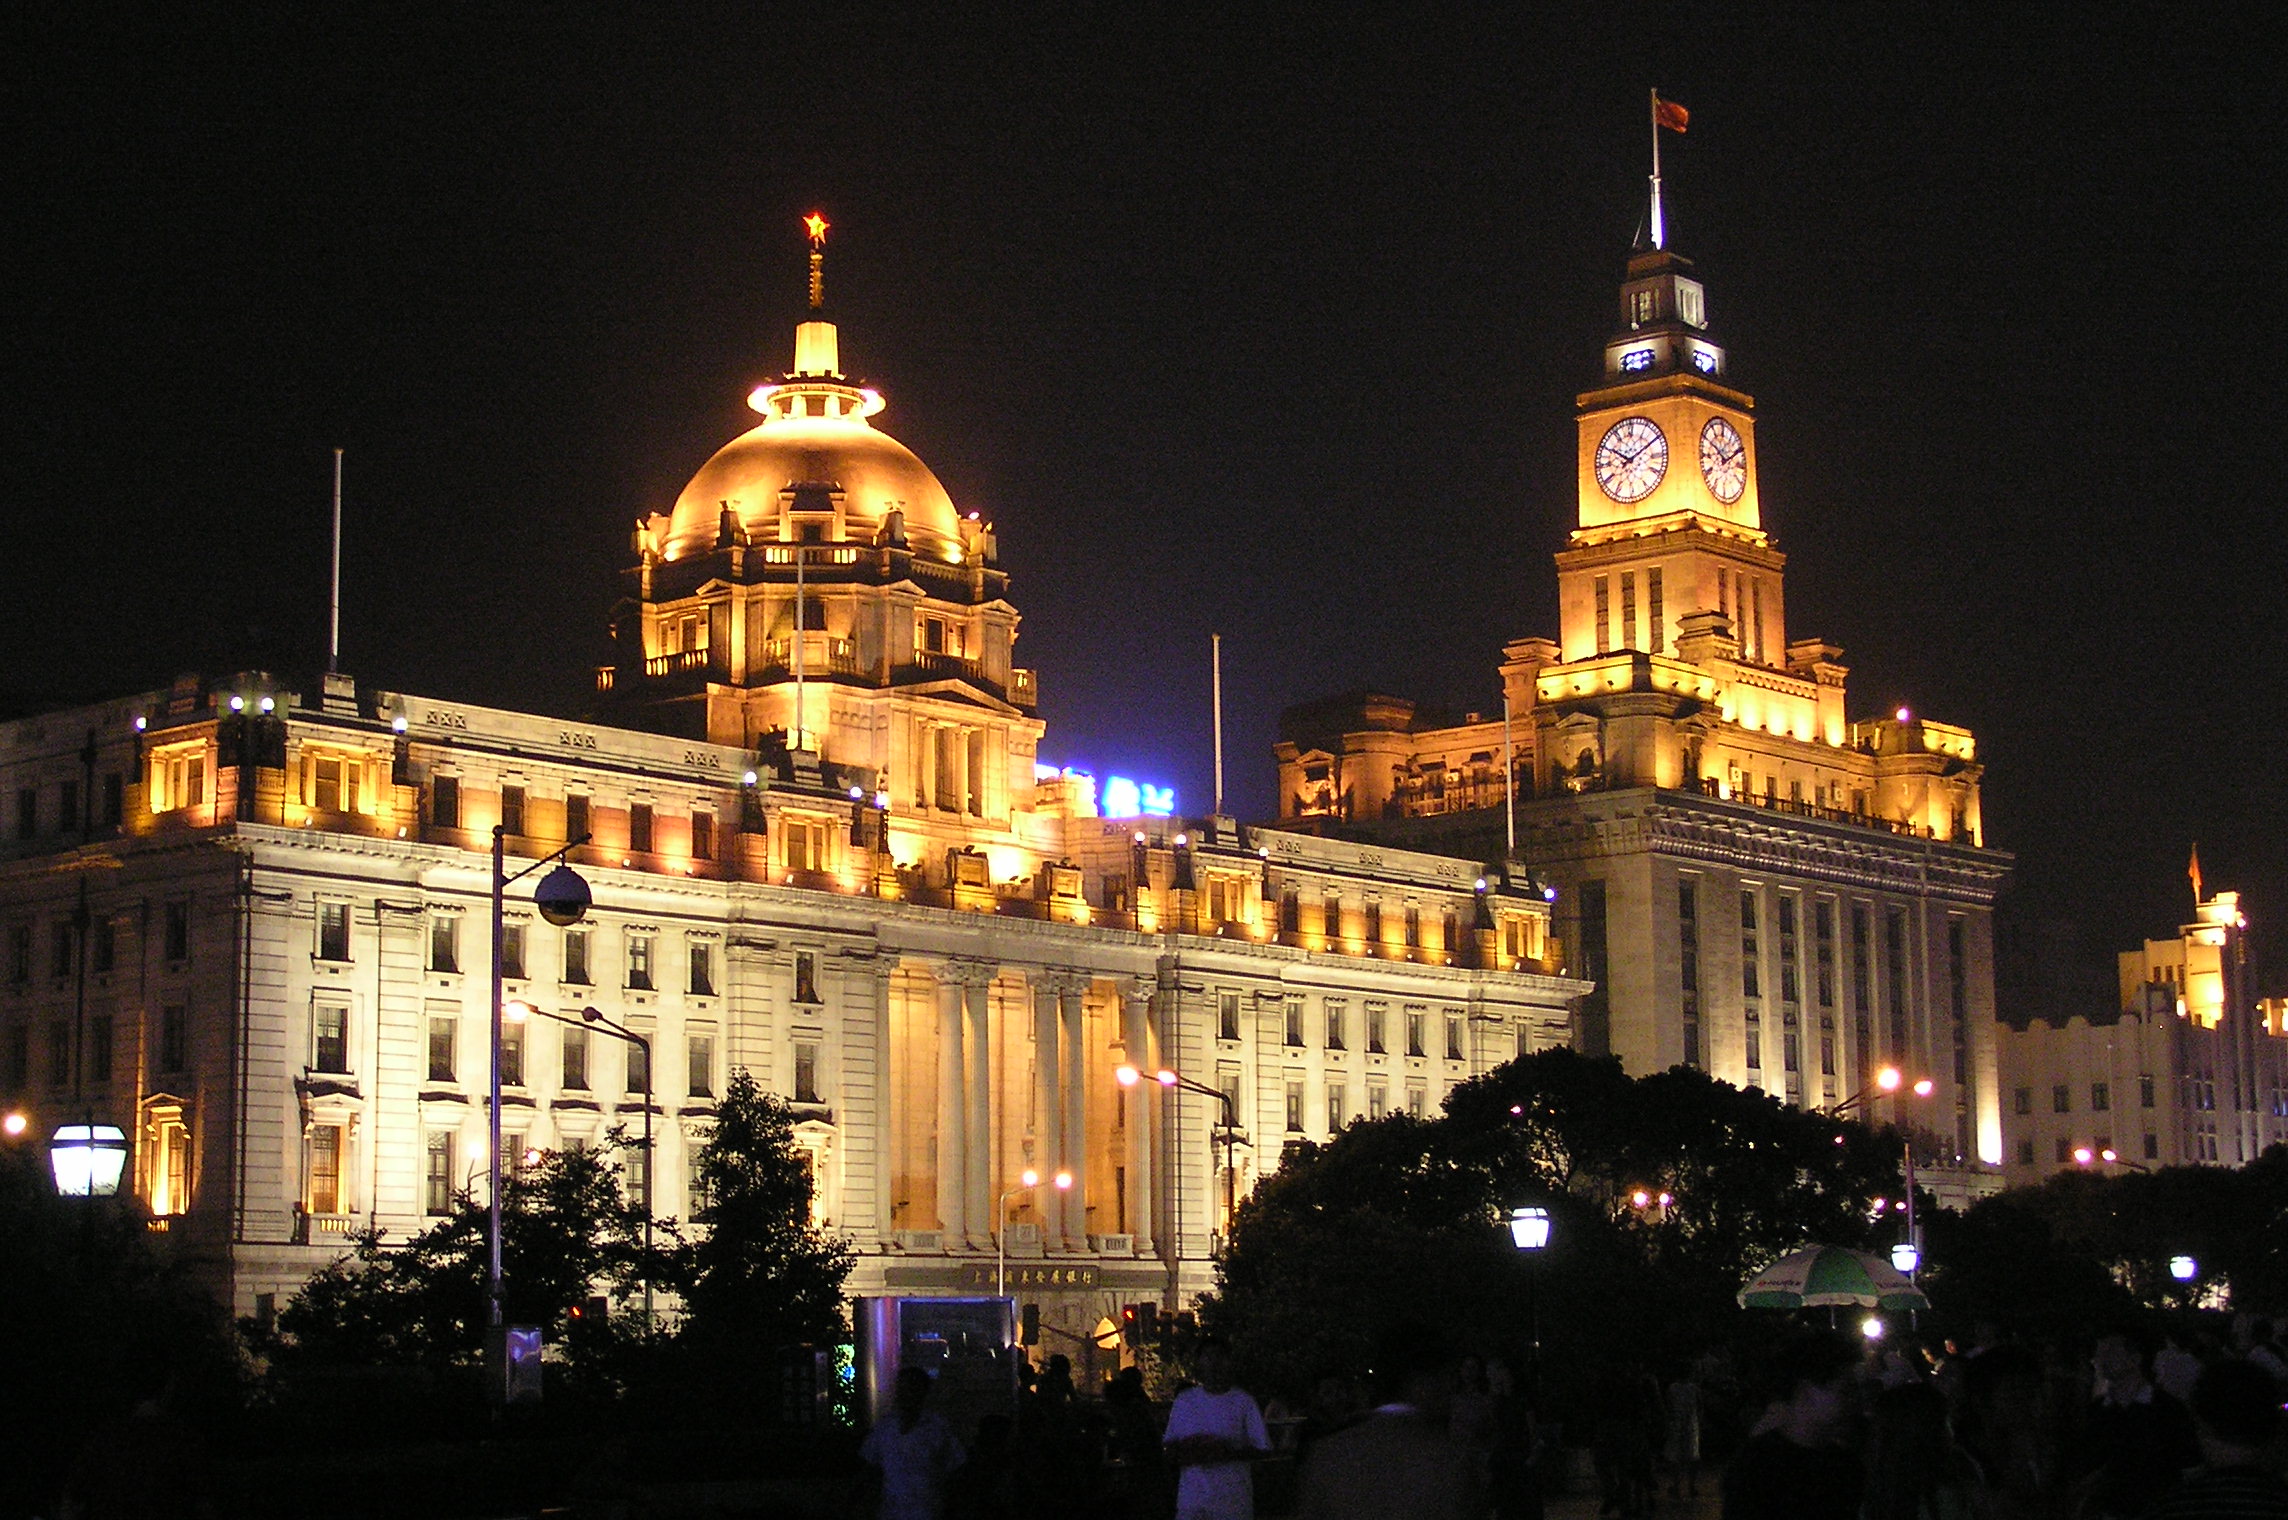 The HSBC Building in 2005 in Shanghai, the headquarters of the Hong Kong and Shanghai Banking Corporation from 1923 to 1955 for its Shanghai operation